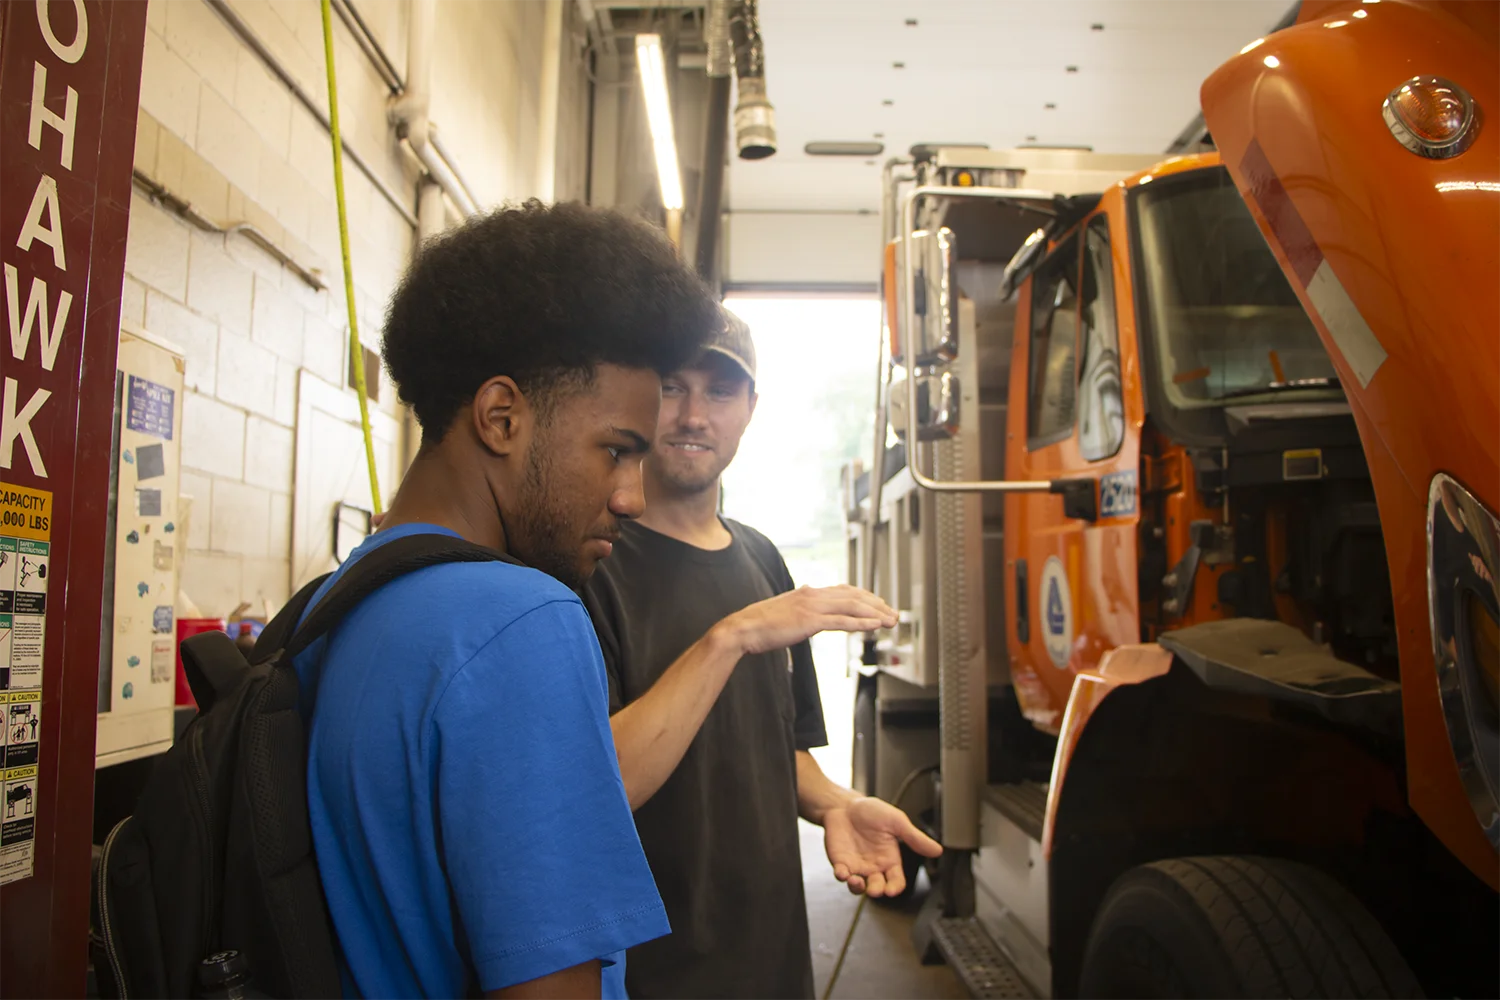 A CLSC student with a DelDOT manager in a garage by a dump truck